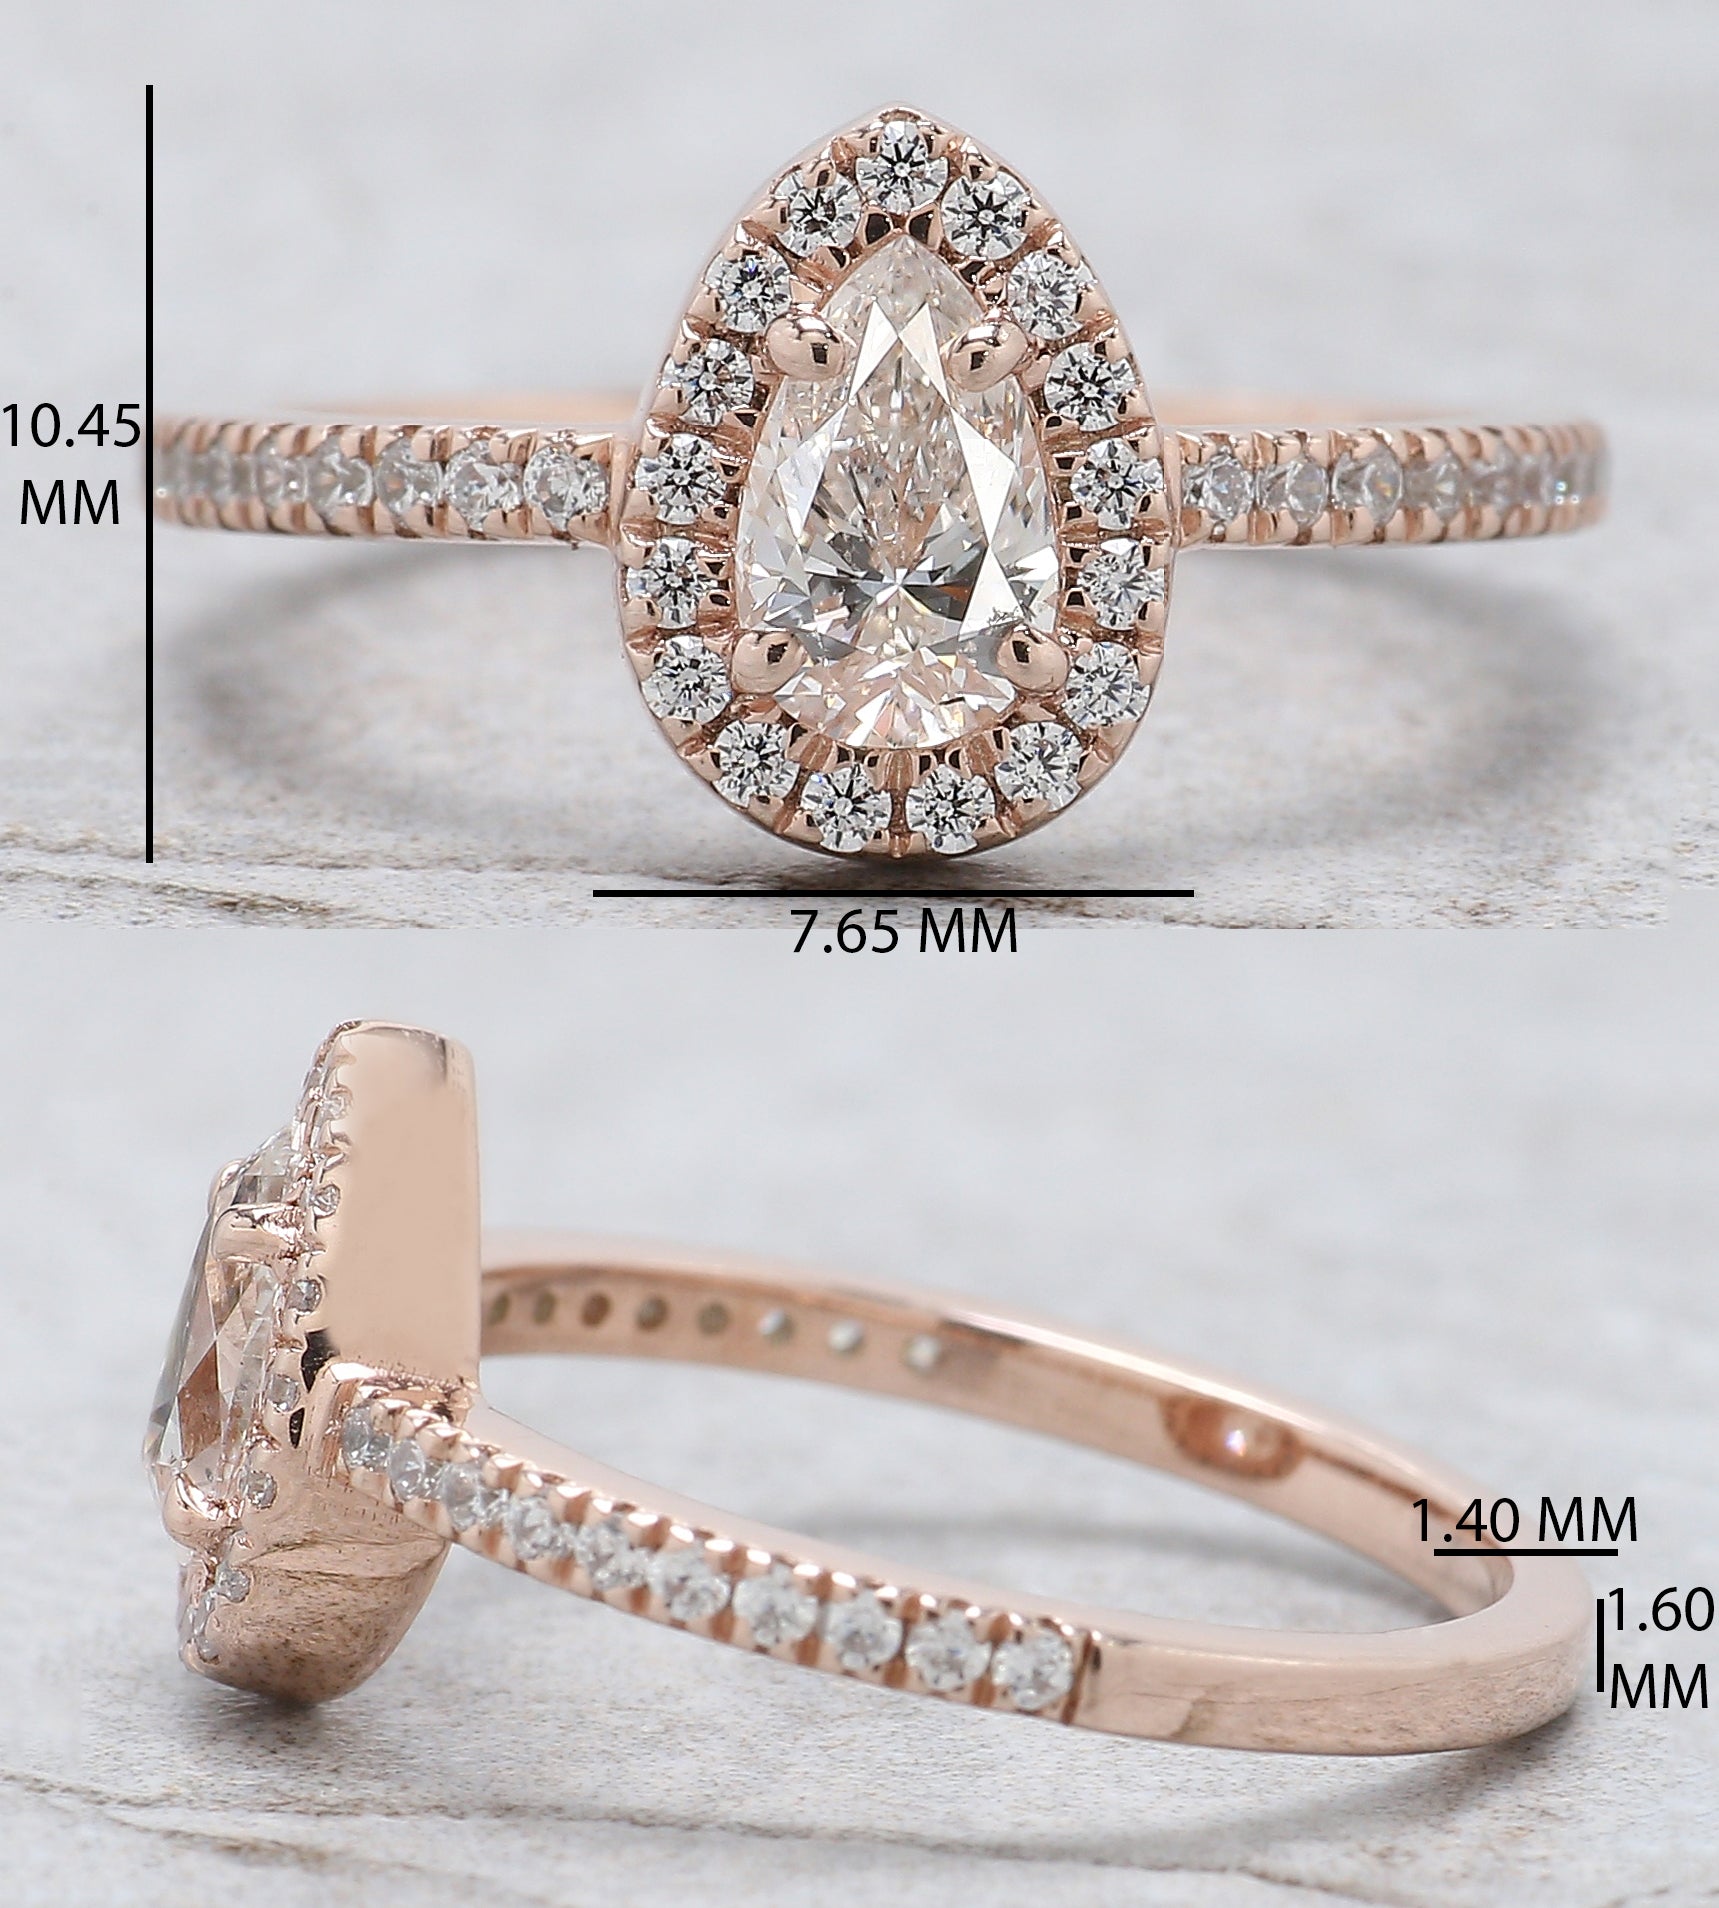 Pear Cut White Color Diamond Ring 0.51 Ct 6.85 MM Pear Diamond Ring 14K Solid Rose Gold Silver Pear Engagement Ring Gift For Her KDL9755